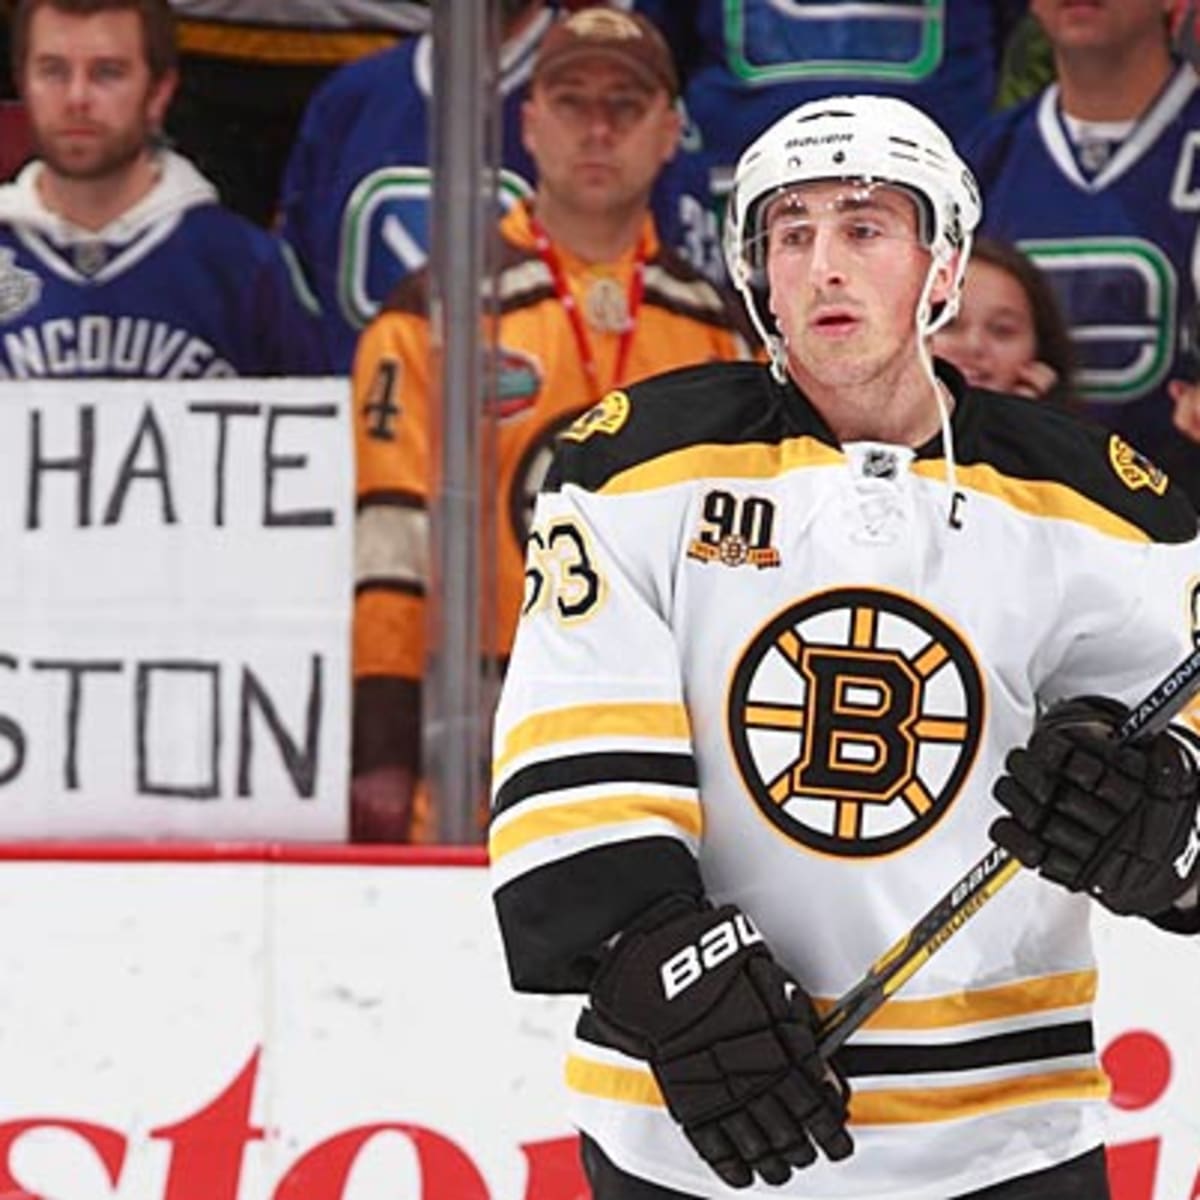 The Bruins were already red-hot. Then they got Brad Marchand back